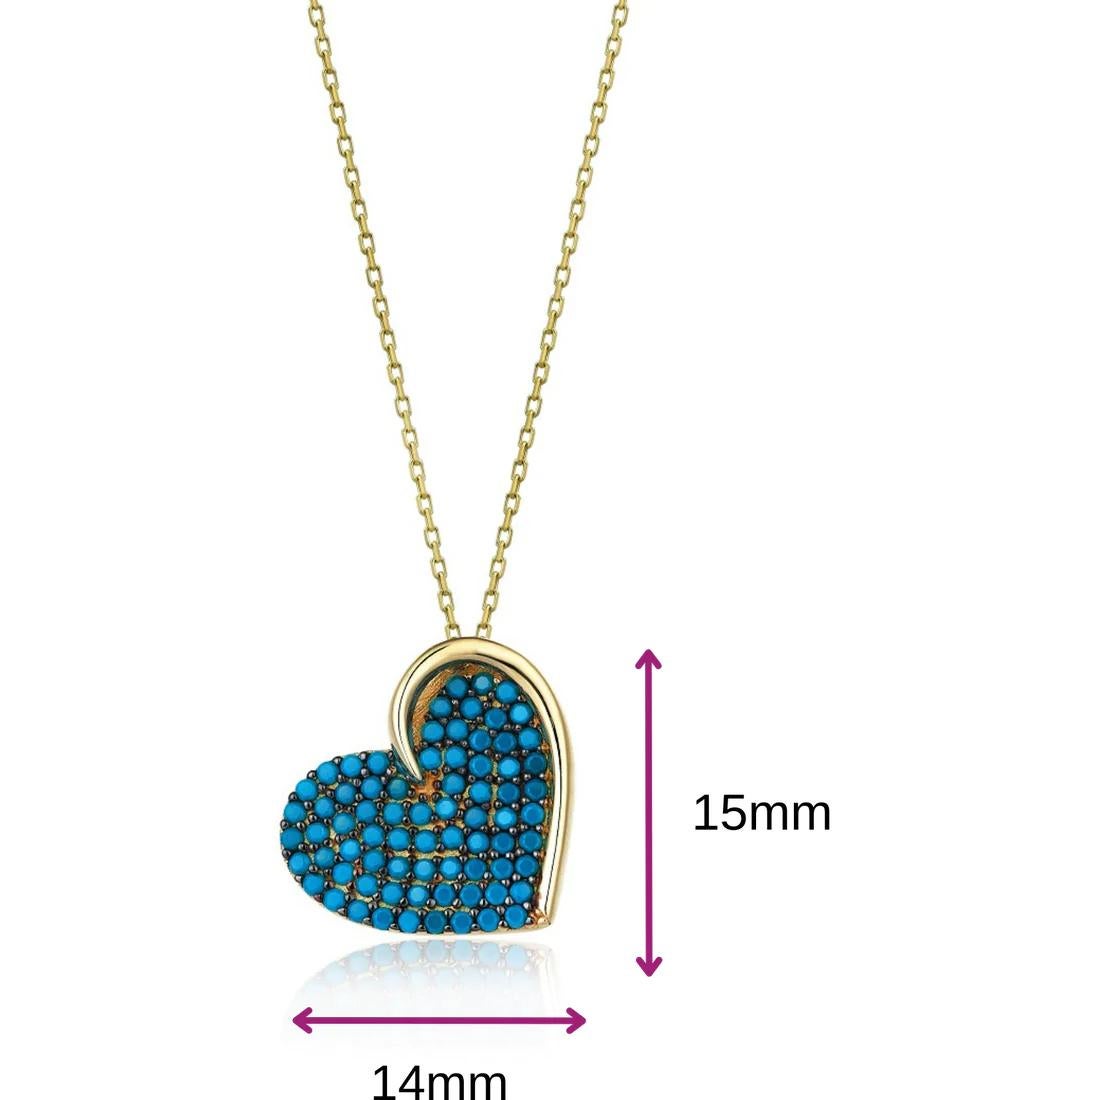 Modern 14k Solid Gold Heart Pendant Necklace, Heart Necklace for Women